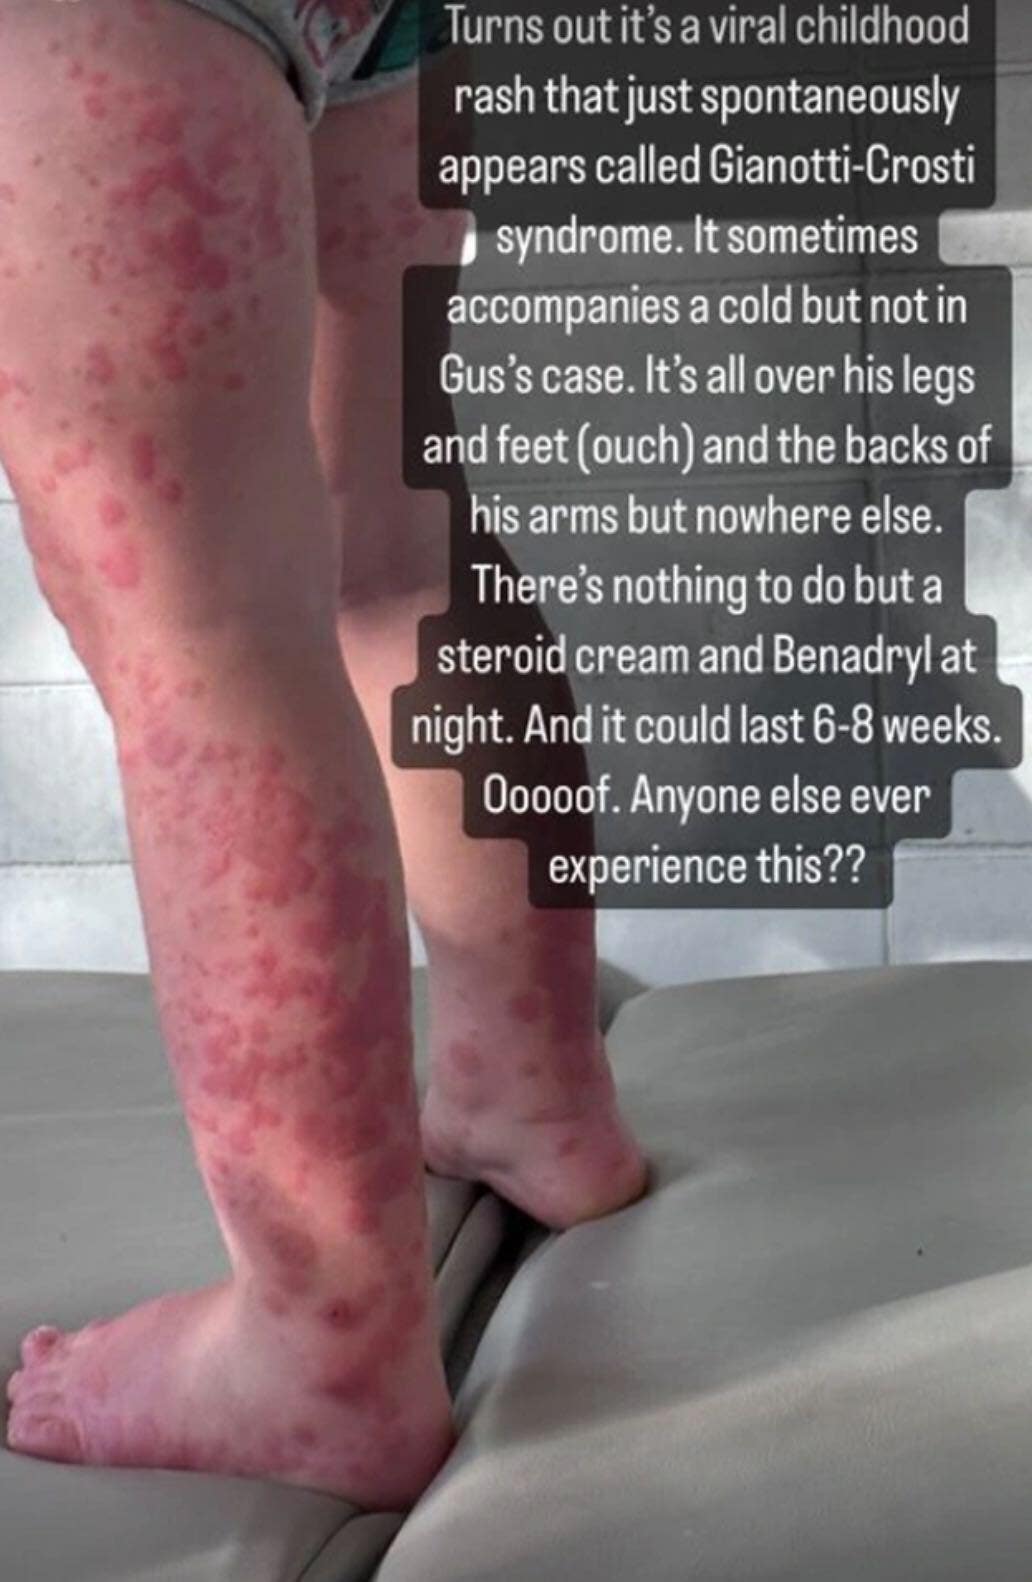 mandy moores ig photo of her son gus rash on his legs